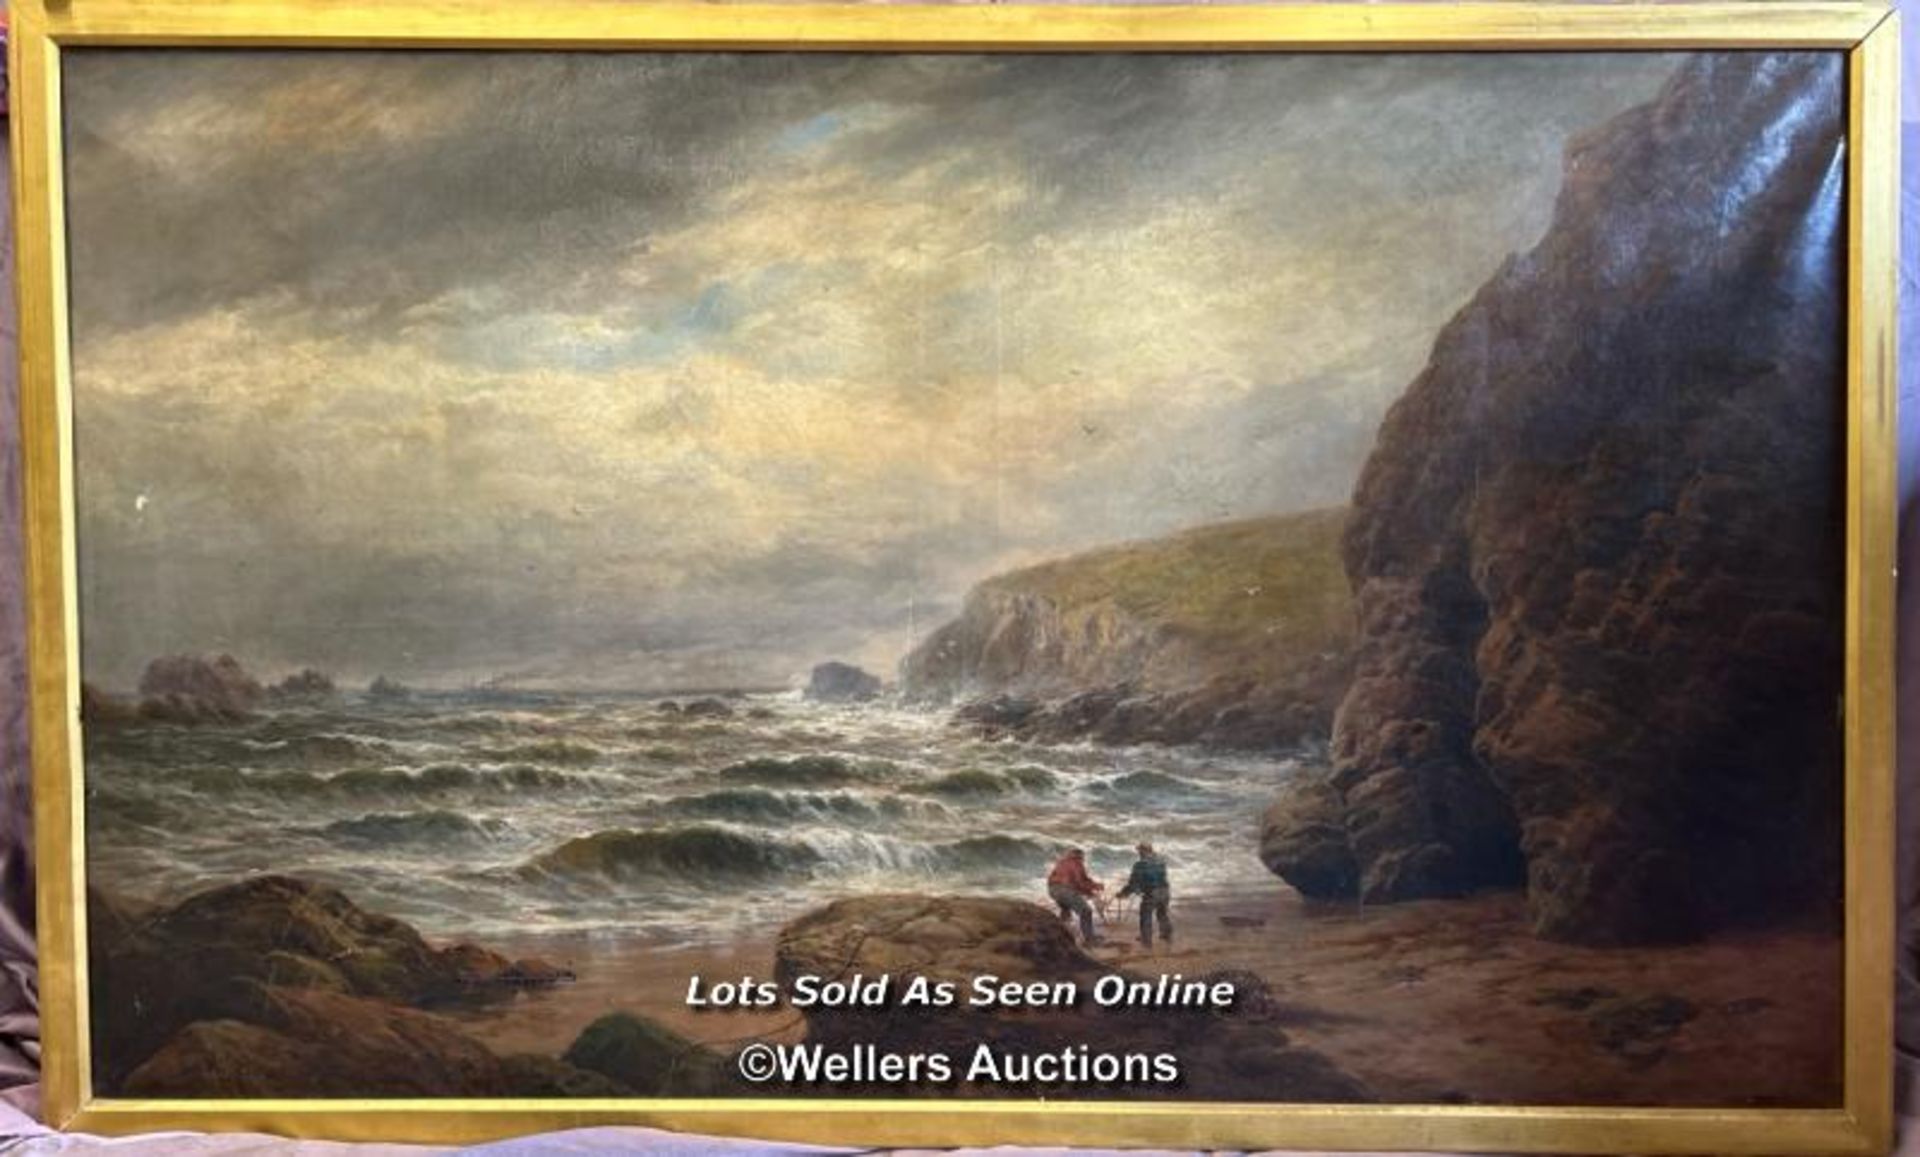 VERY LARGE FRAMED 19TH CENTURY OIL ON CANVAS SEASCAPE BY GEORGE HENRY JENKINS (1813-1914), 159.5 X